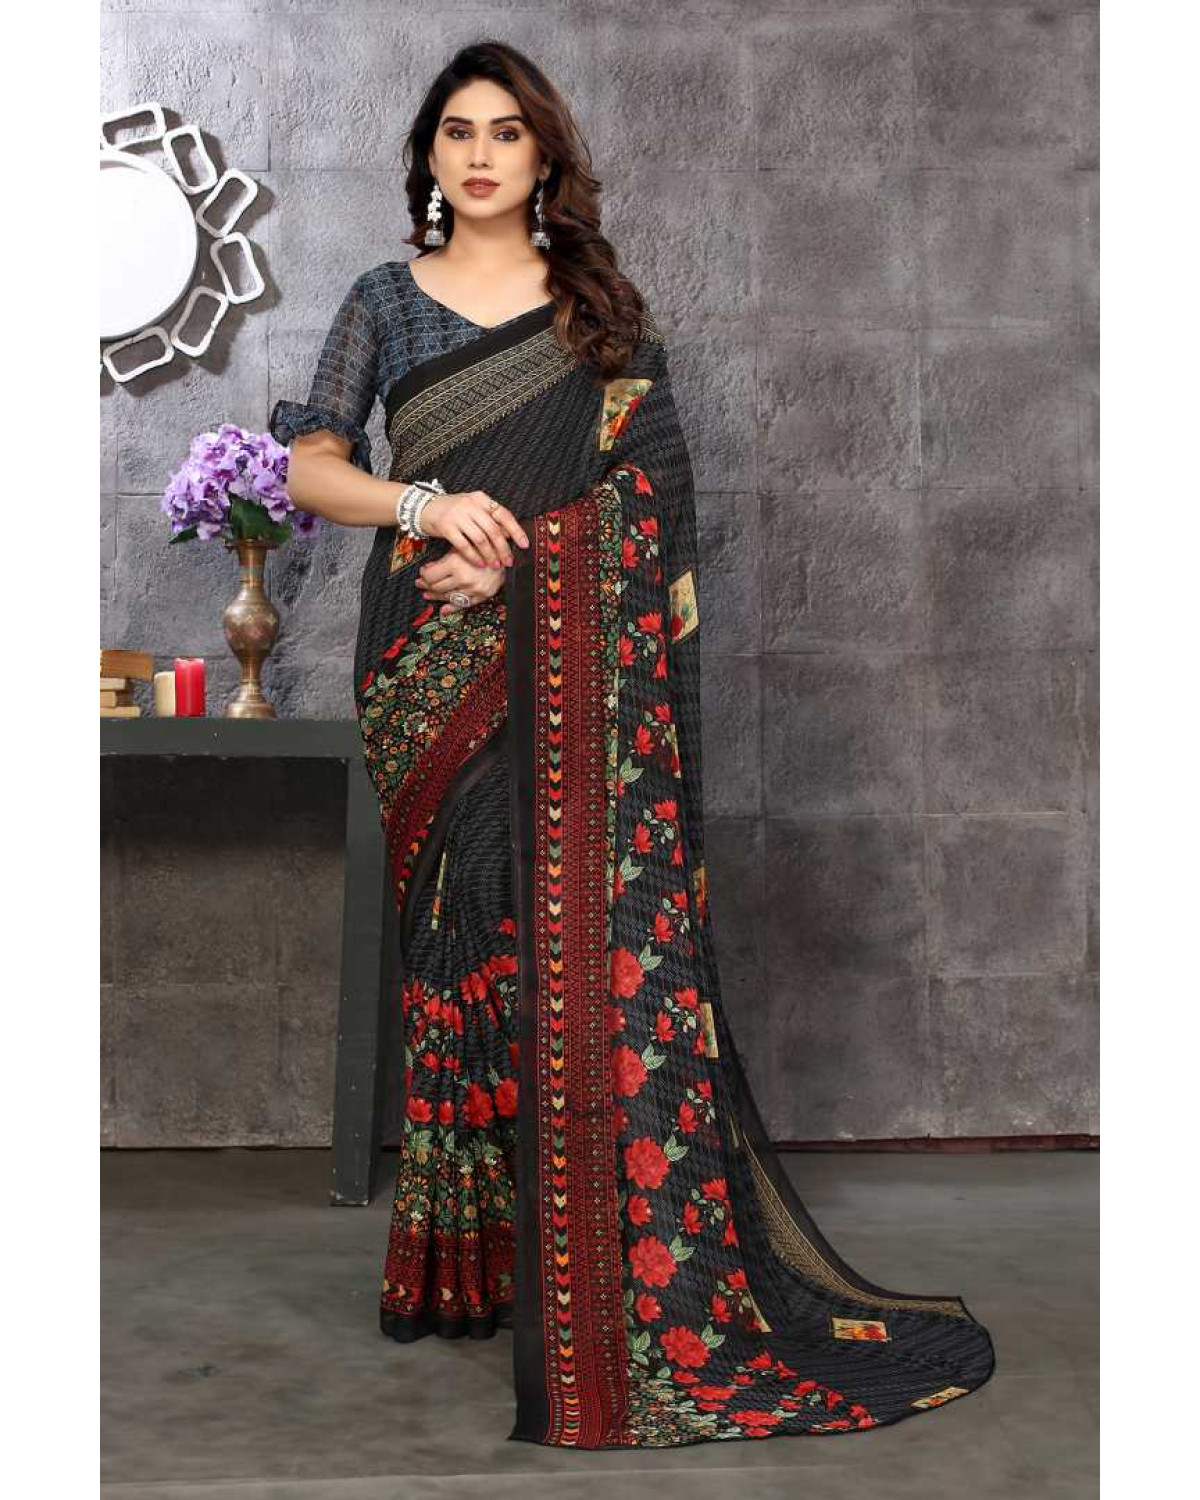 Buy Laxmipati Red And Black Georgette Saree at Rs.1916/Piece in surat offer  by Laxmipati Sarees